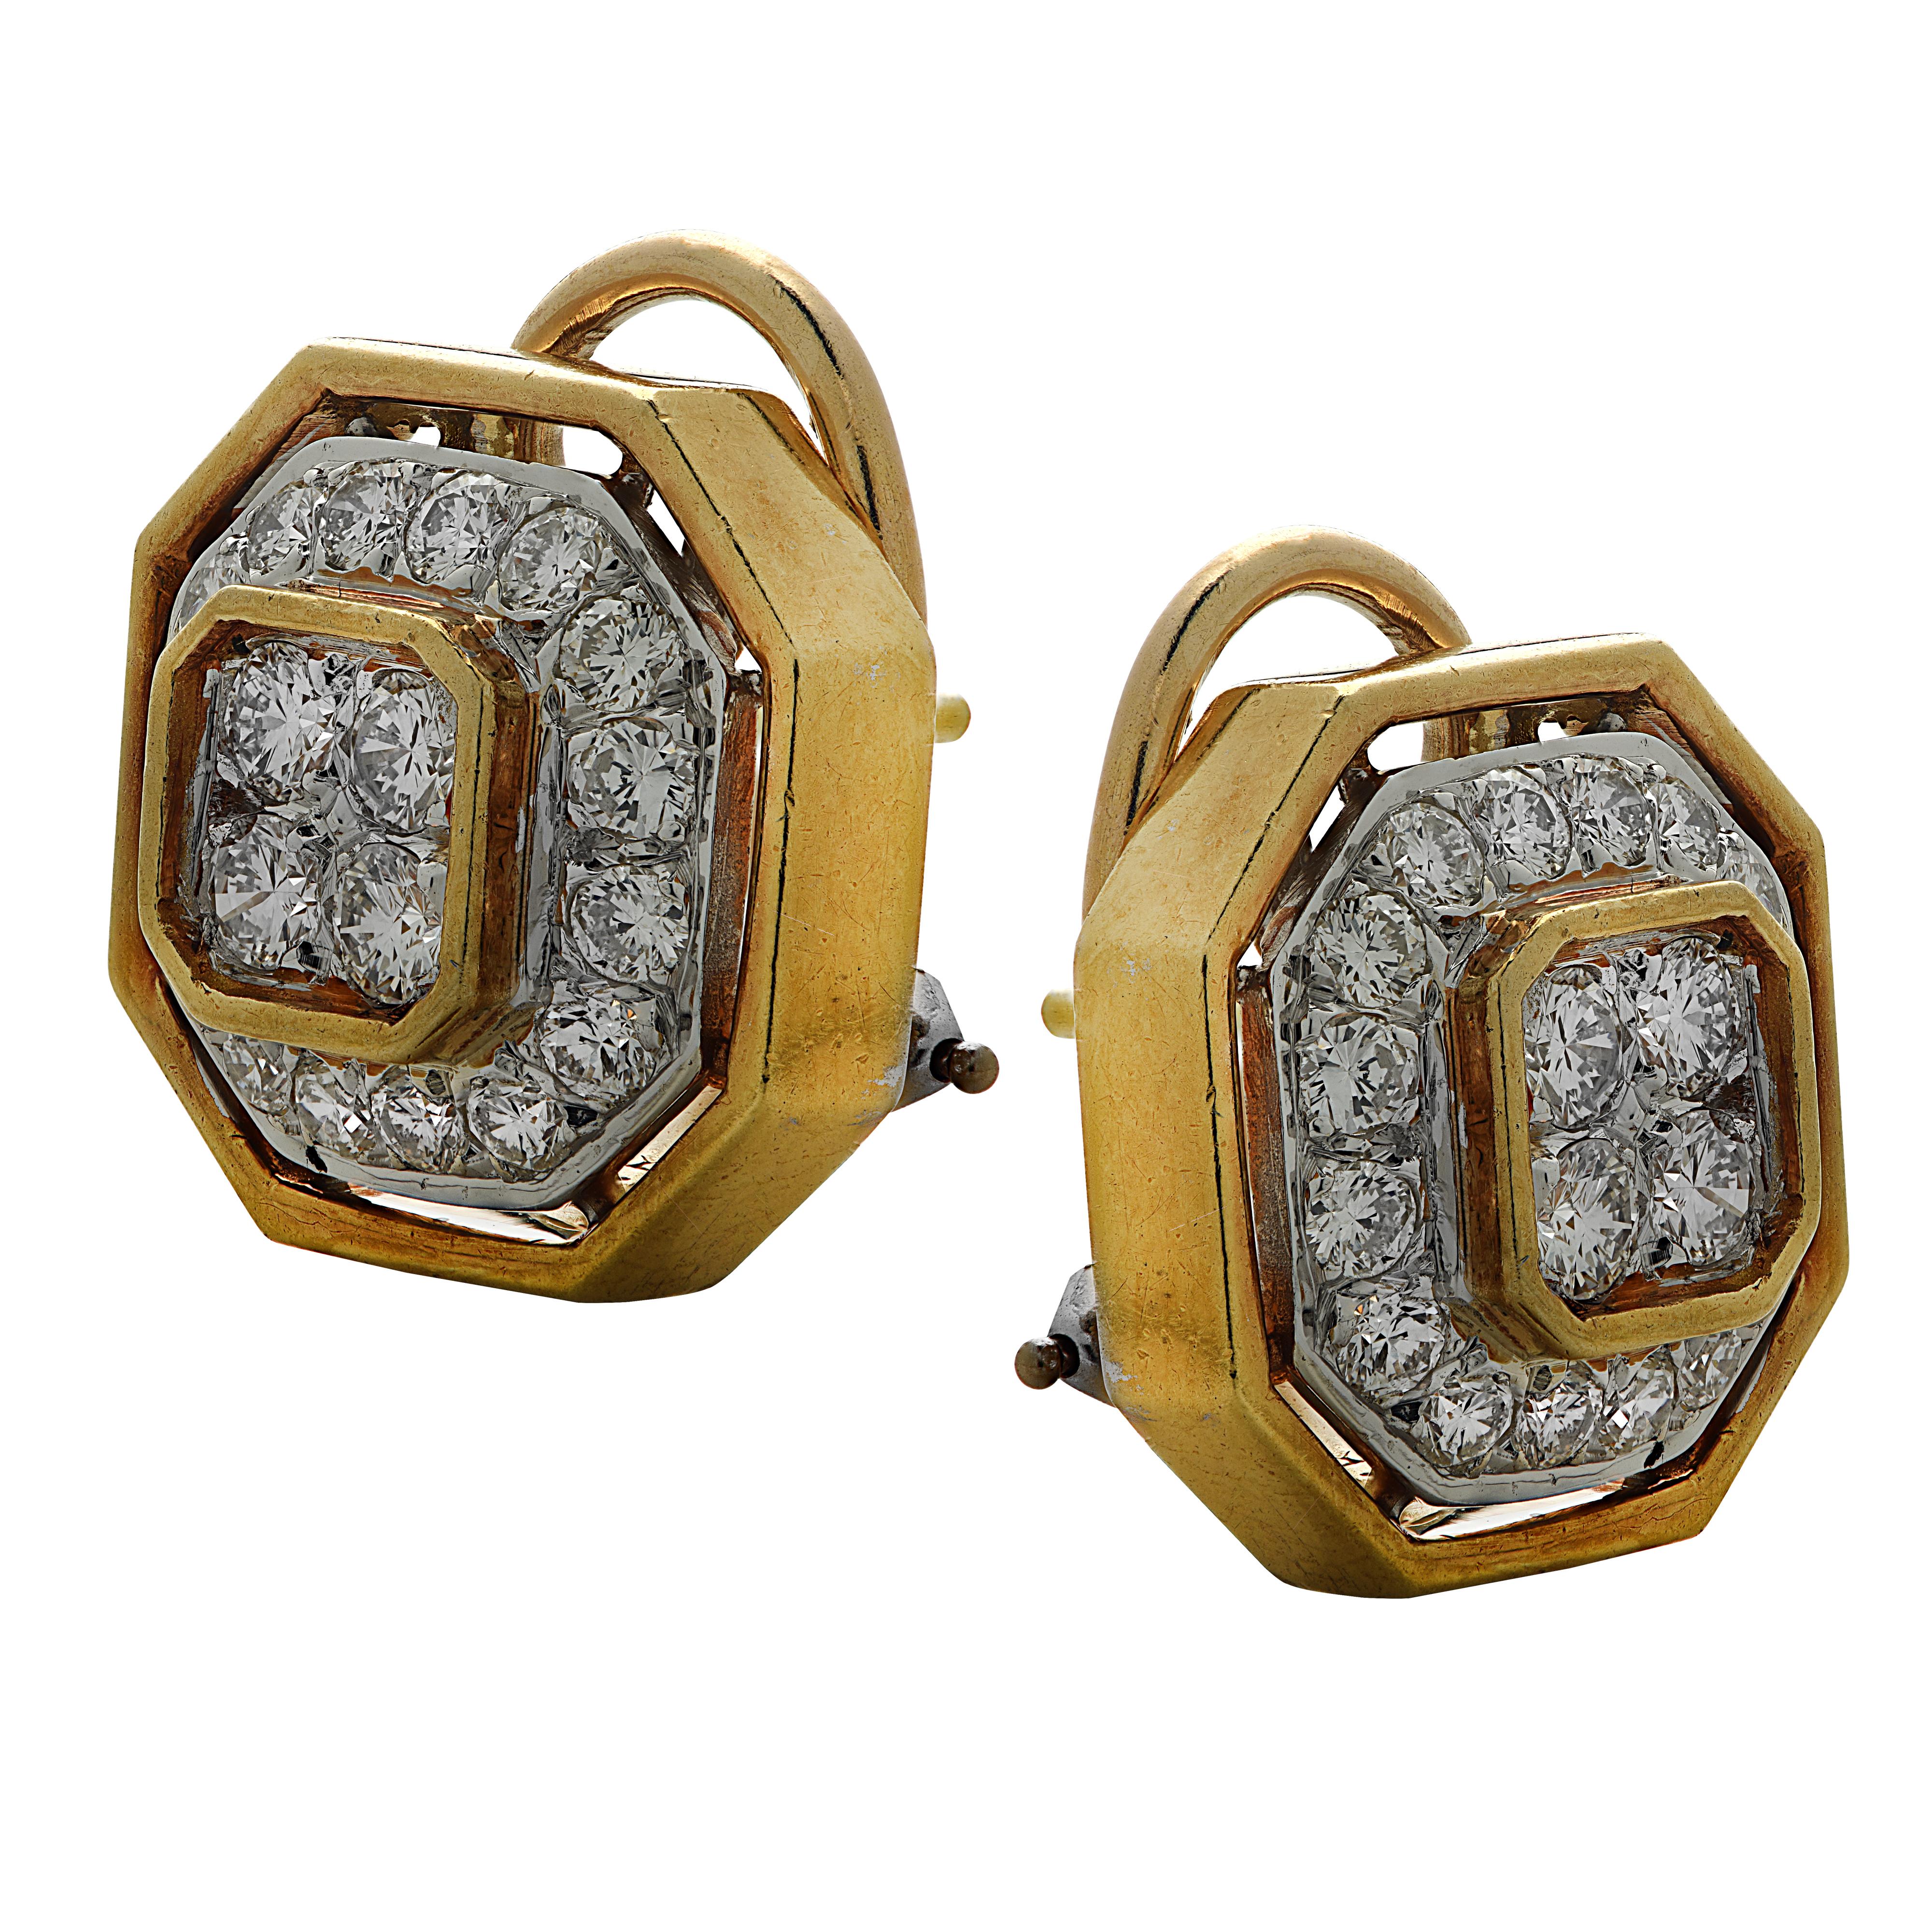 Stunning earrings crafted in platinum and 18 karat yellow gold featuring 40 round brilliant cut diamonds weighing approximately 3 carats total, G color, VS clarity, set in an octagon. These striking earrings measure .65 of an inch in width and .65